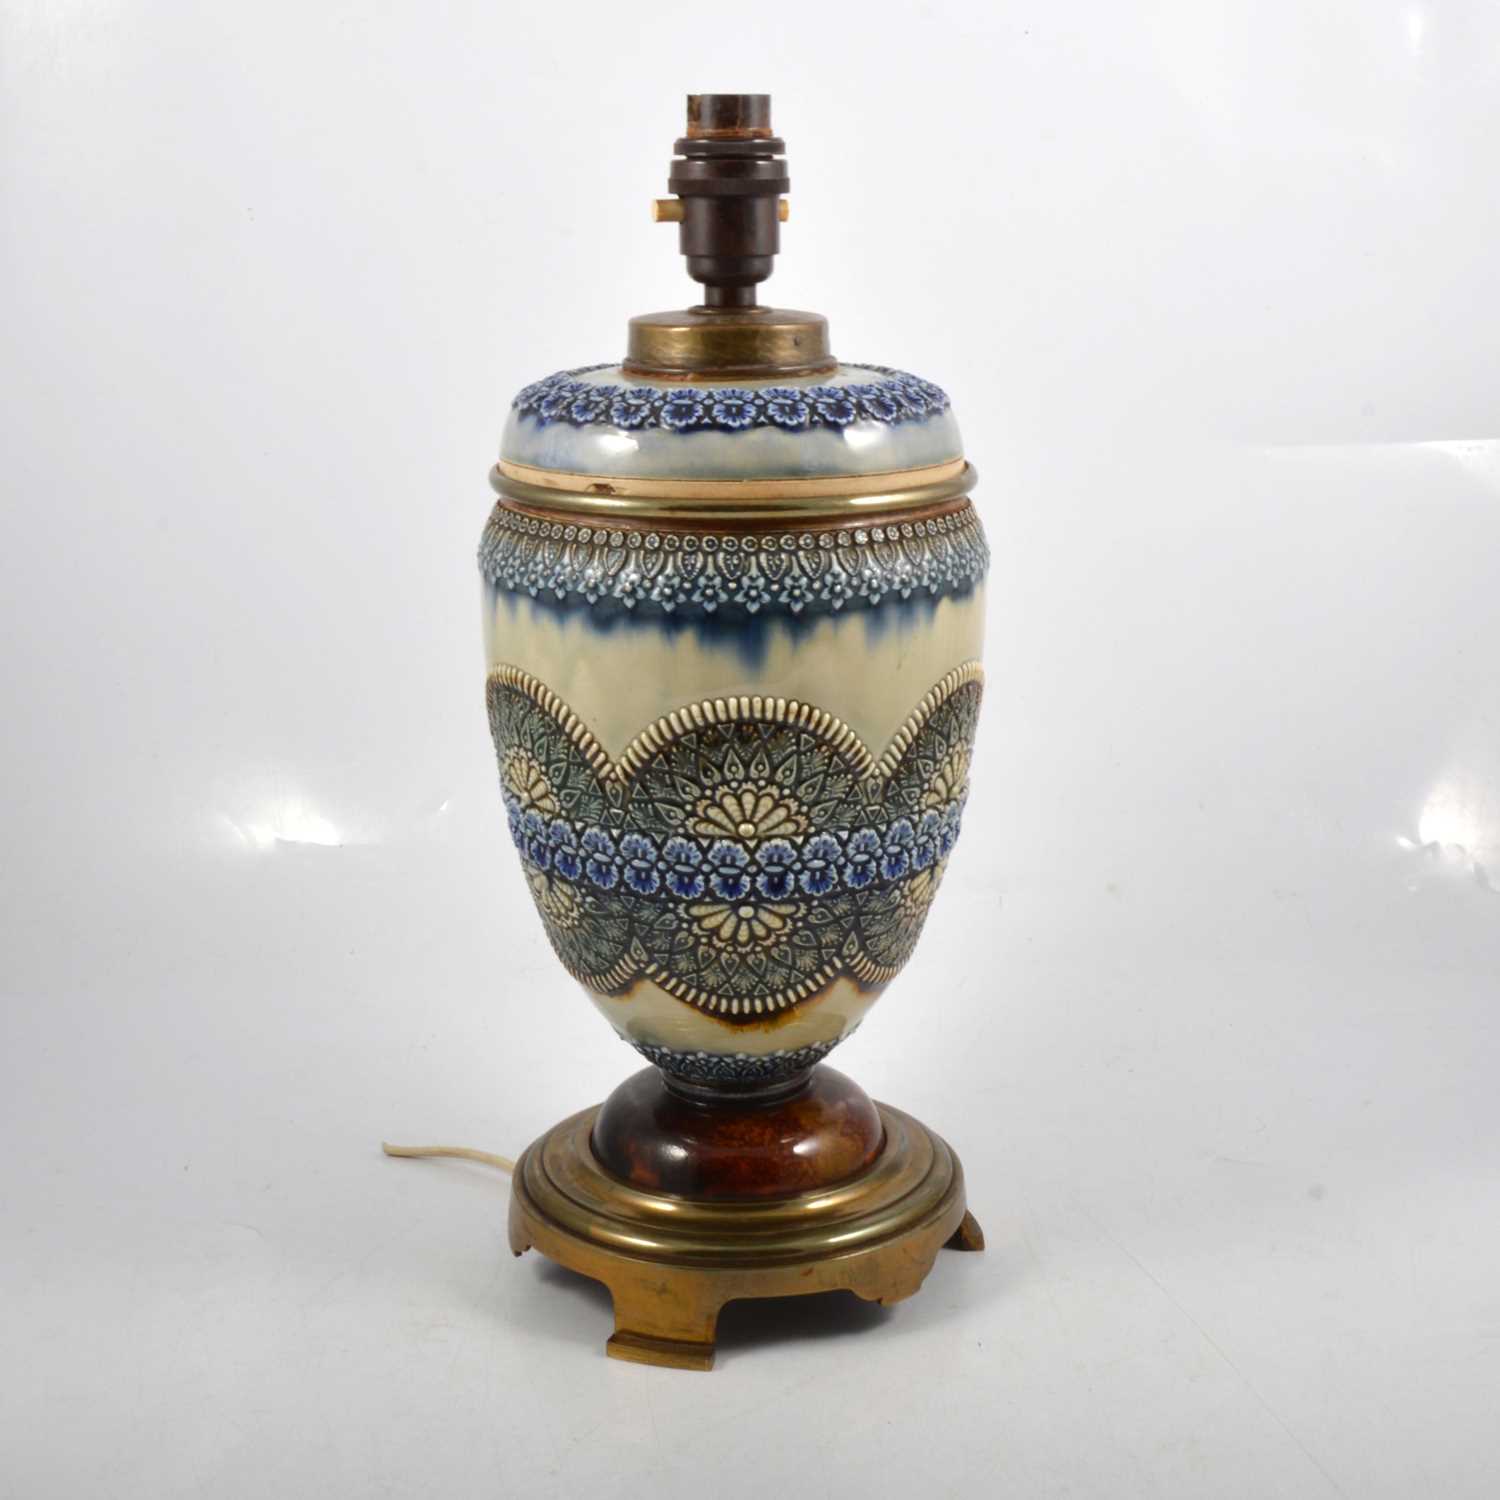 Lot 92 - Doulton Lambeth-type stoneware oil lamp, converted to electricity.